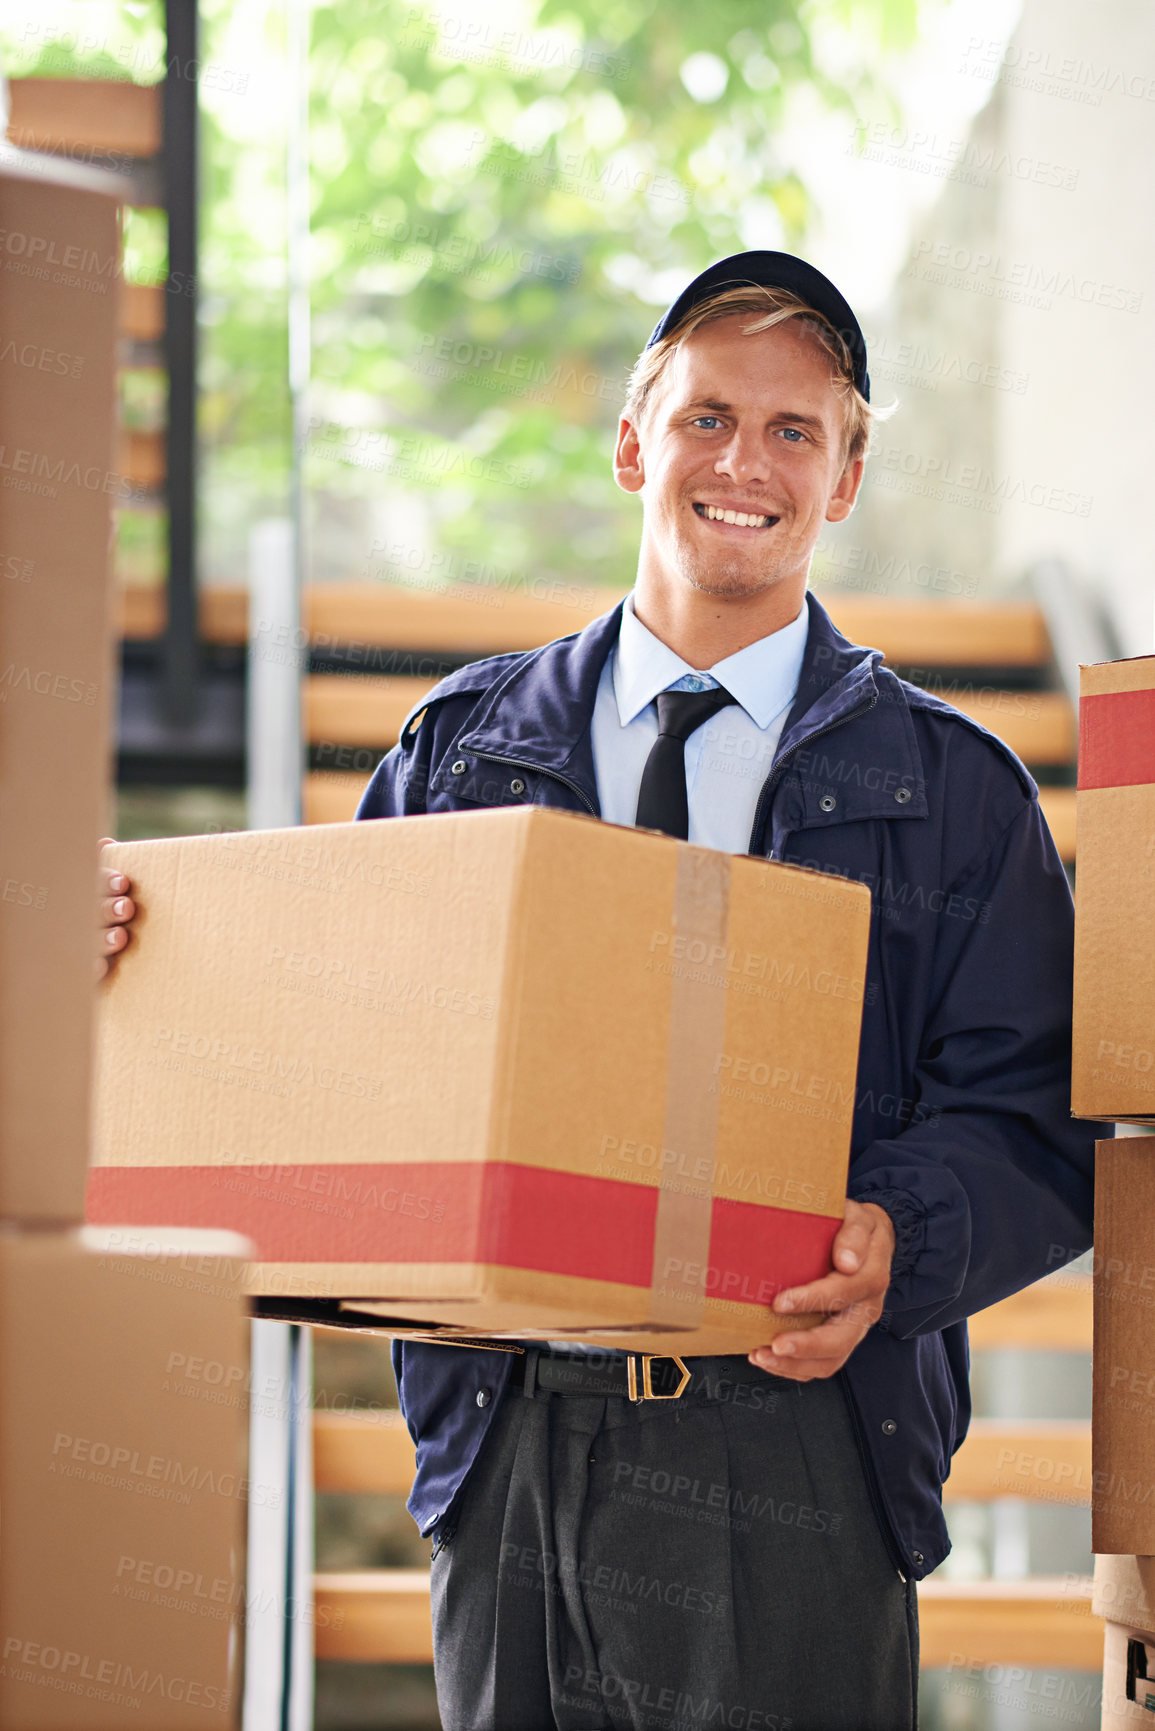 Buy stock photo Shot of a happy courier holding a box